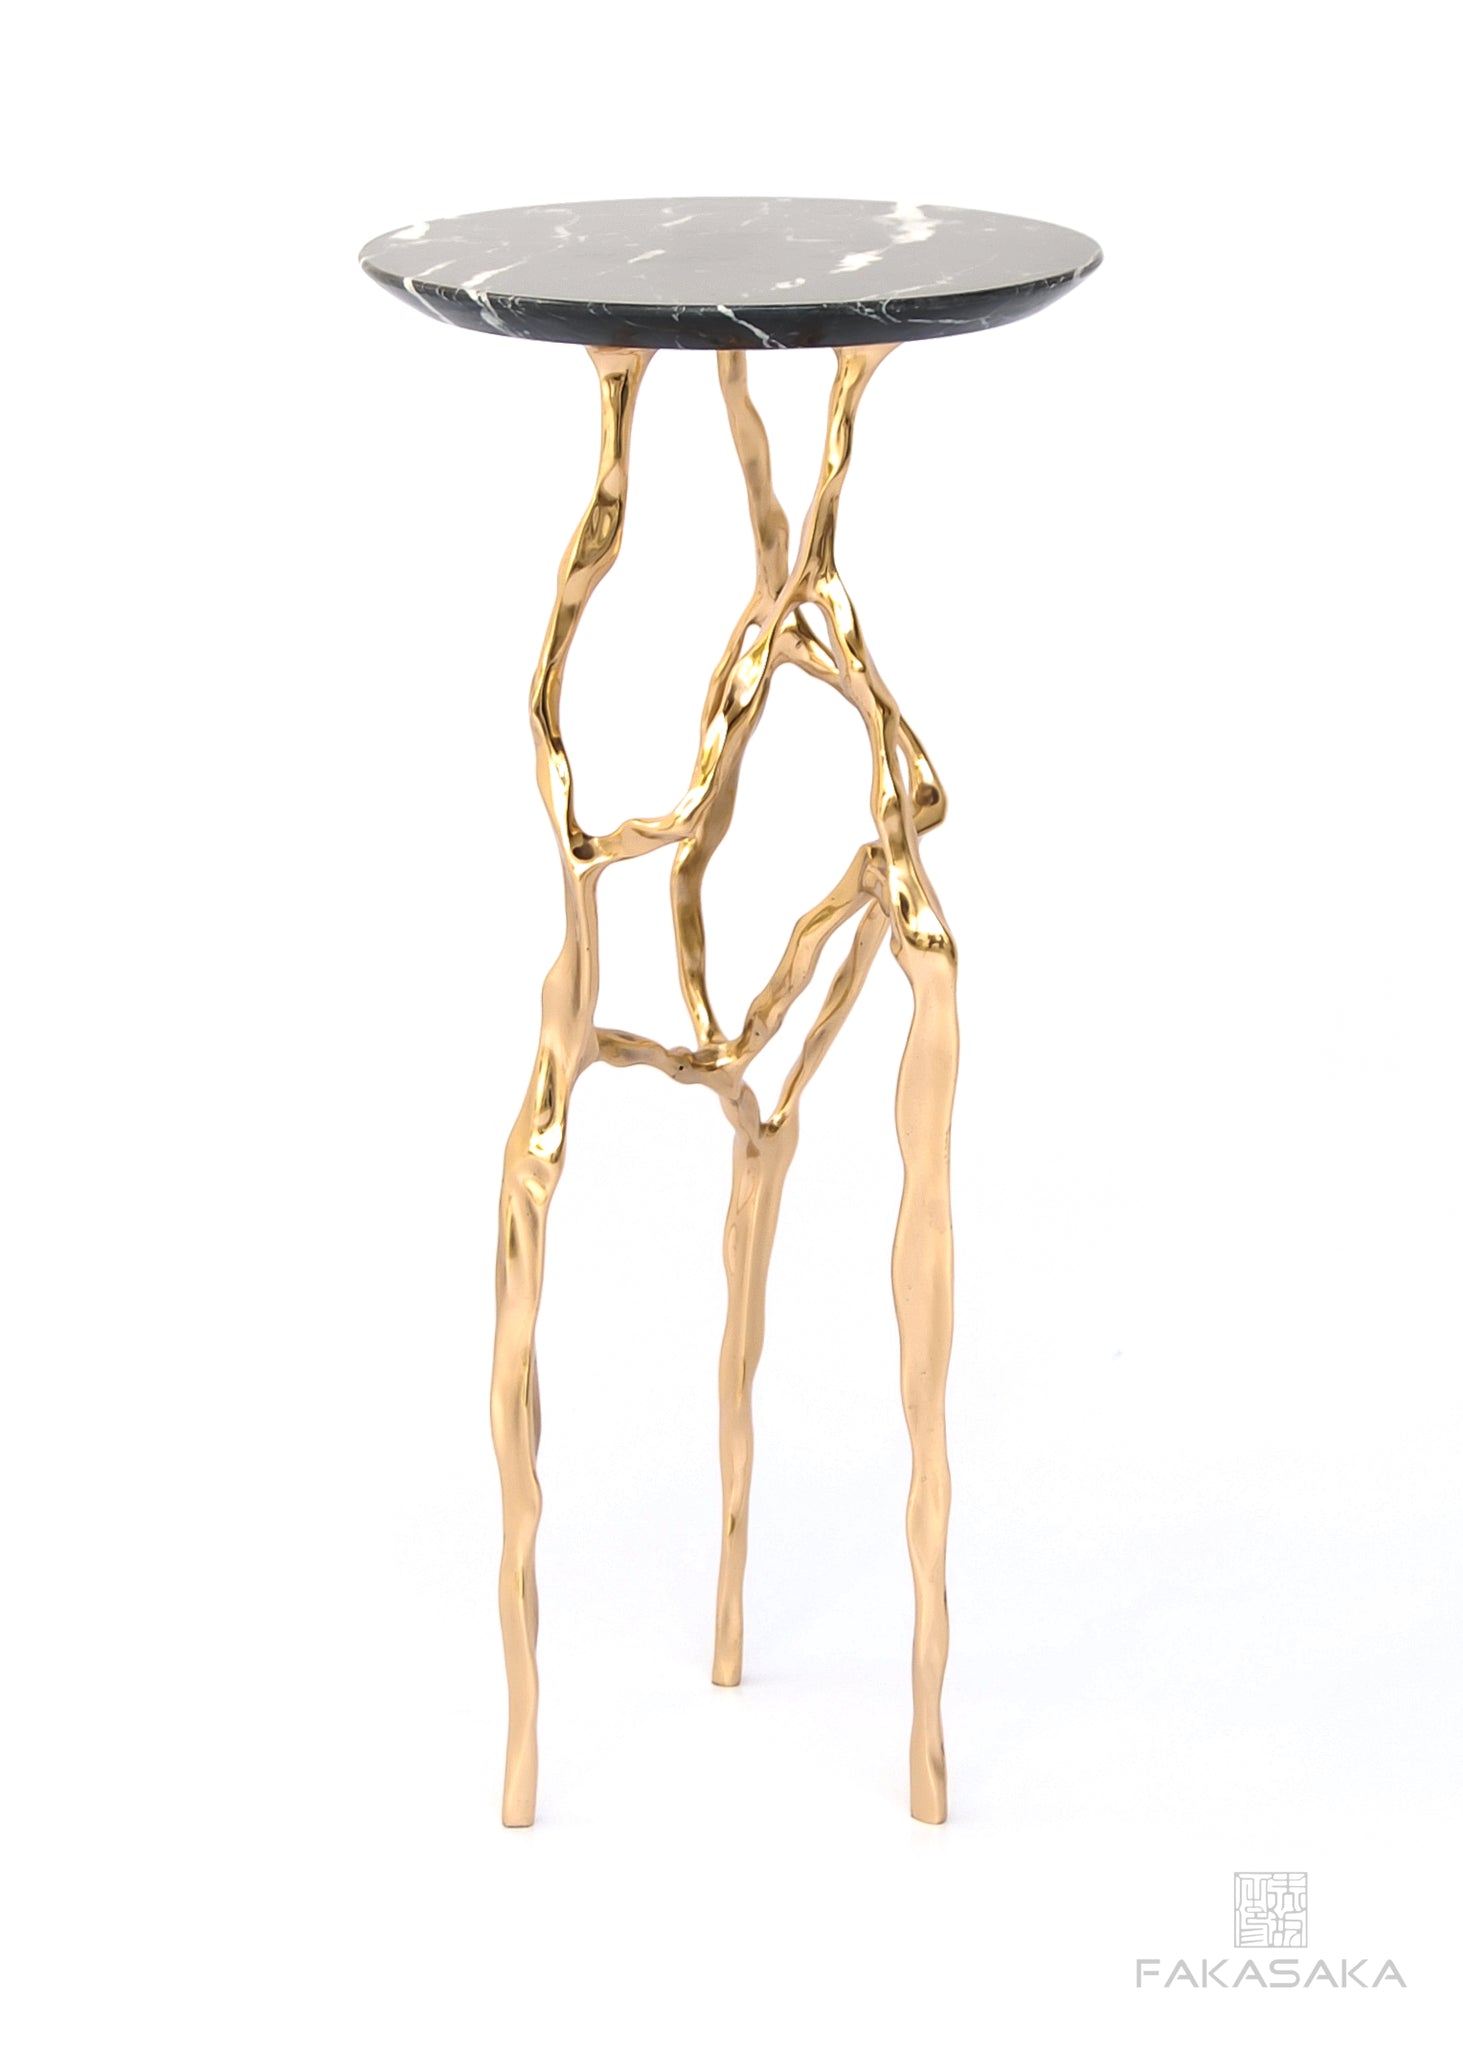 SID DRINK TABLE<br><br>NERO MARQUINA MARBLE<br>POLISHED BRONZE